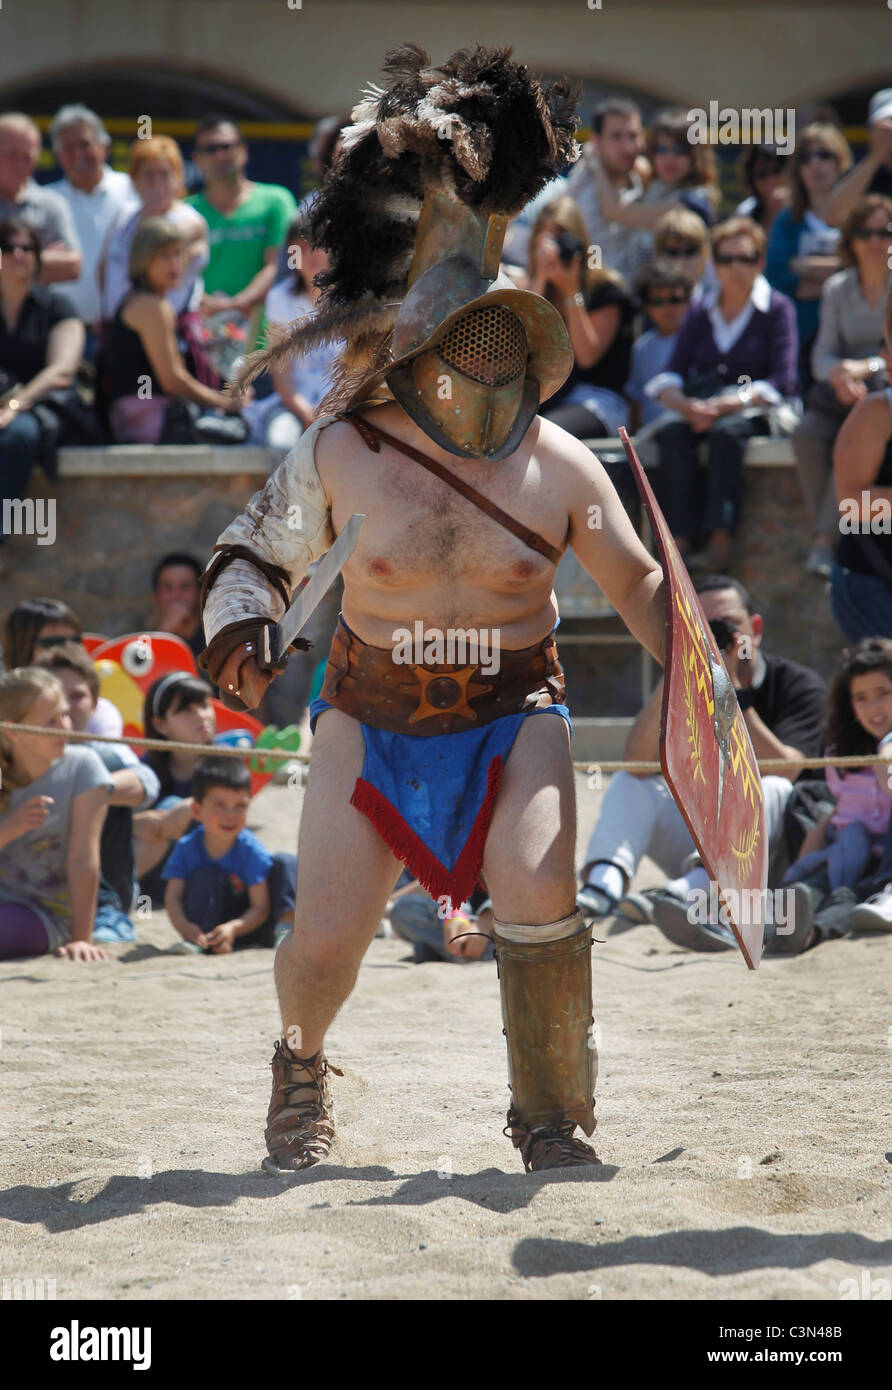 Gladiator fighting at the Roman and Greek festival in L'Escala, Spain Stock Photo